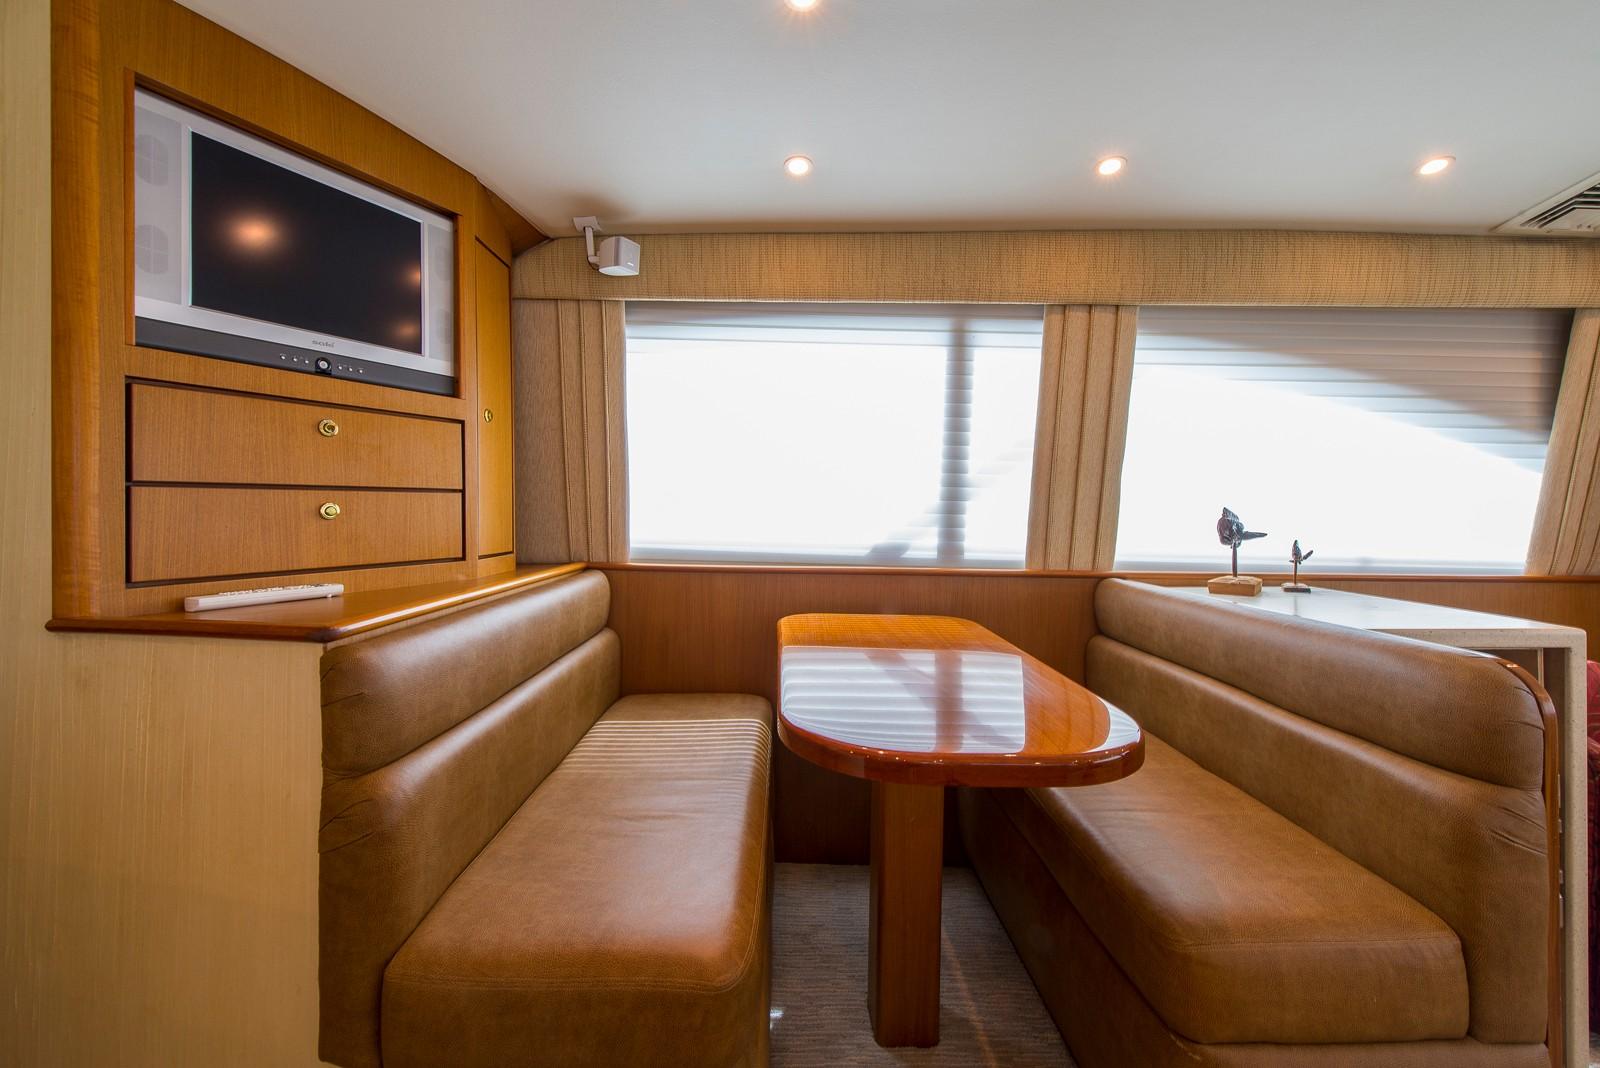 Ocean 46 Kenz Sea - Dinette, Seating, Table and TV